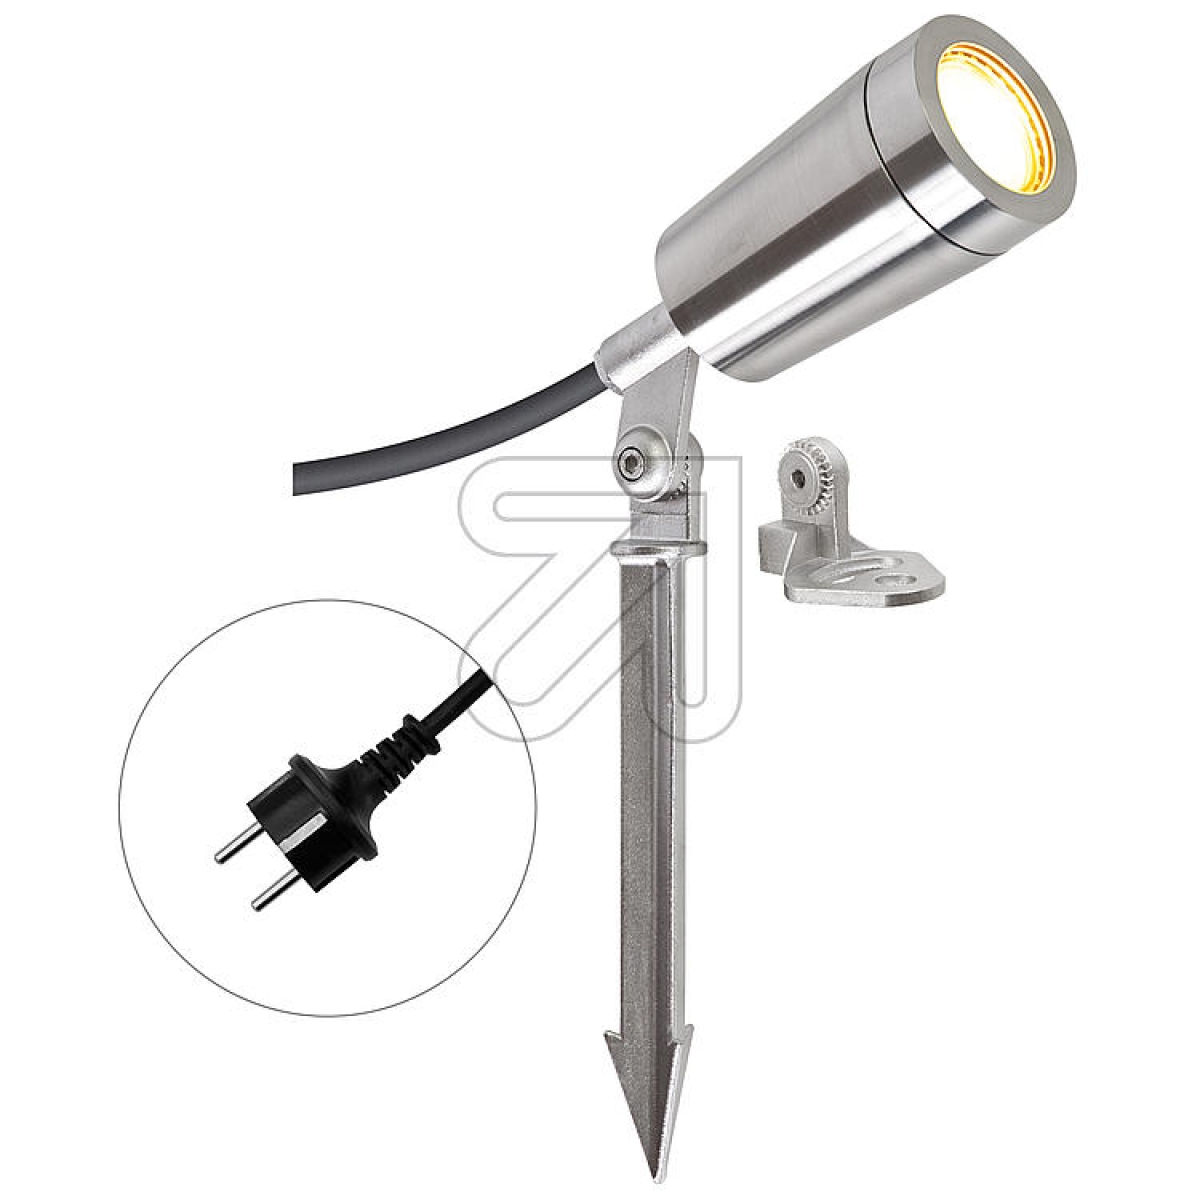 EVNLED garden spot stainless steel IP65 2700K 5.5W L651023527Article-No: 627615